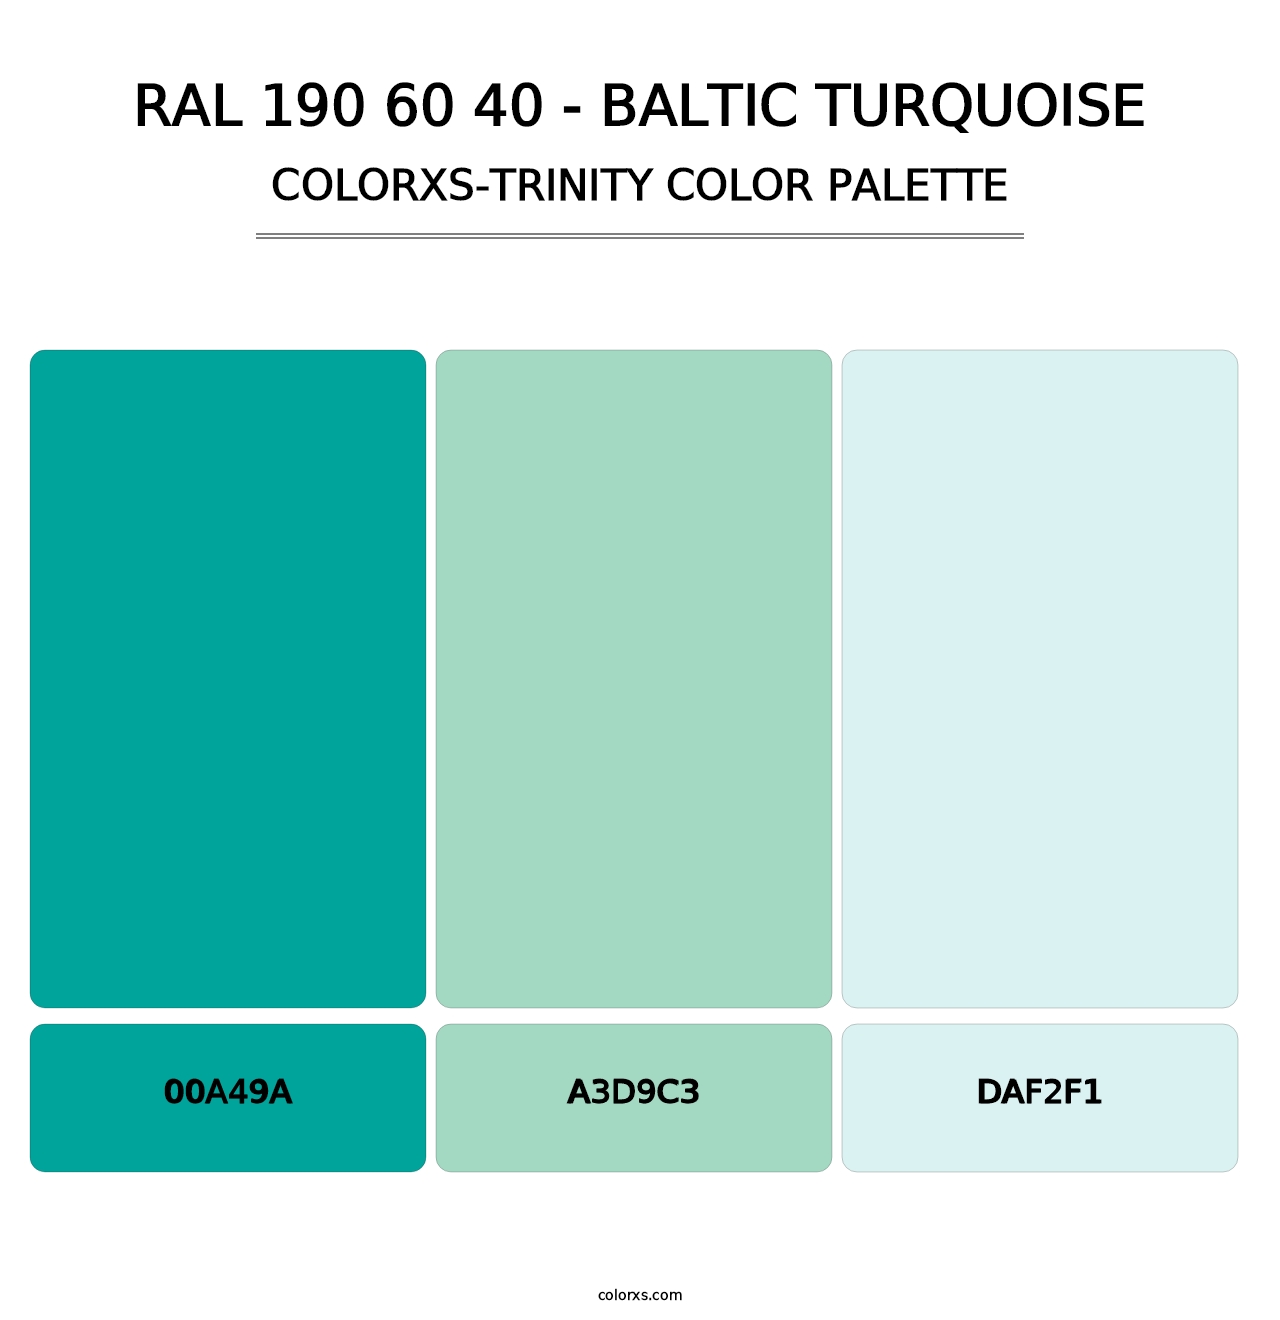 RAL 190 60 40 - Baltic Turquoise - Colorxs Trinity Palette